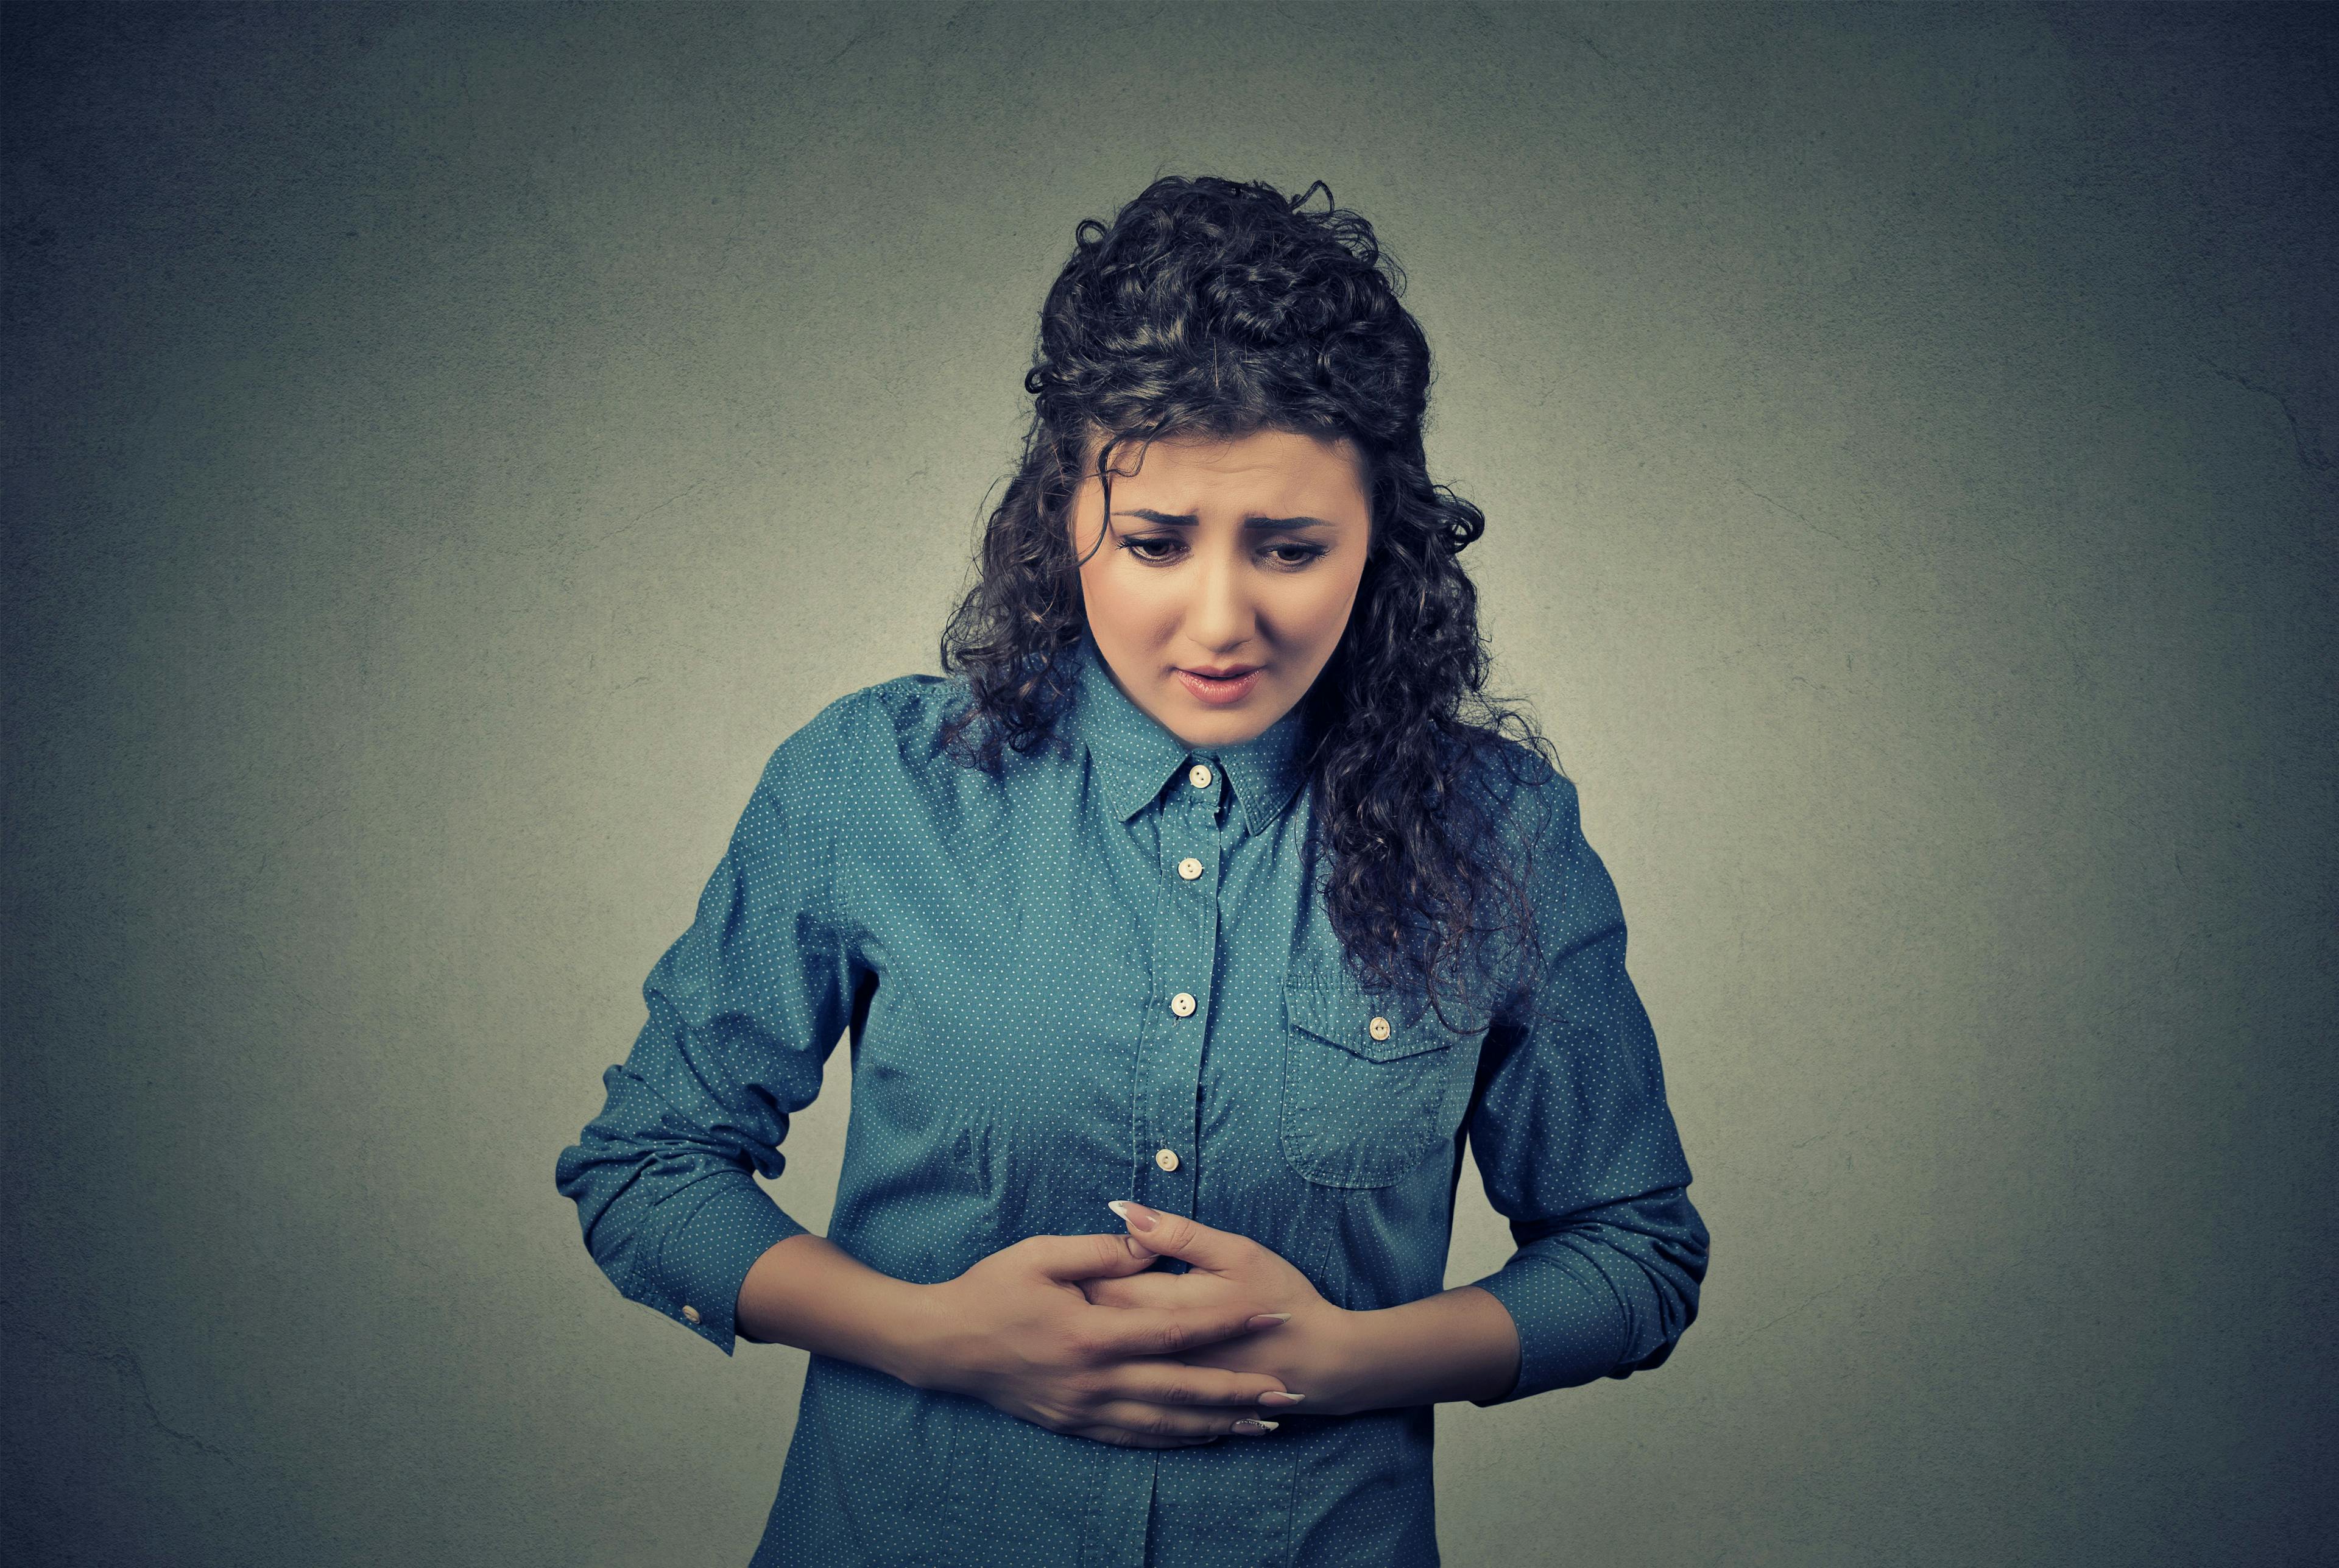 Woman with a stomach ache holding stomach | Credit: Fotolia